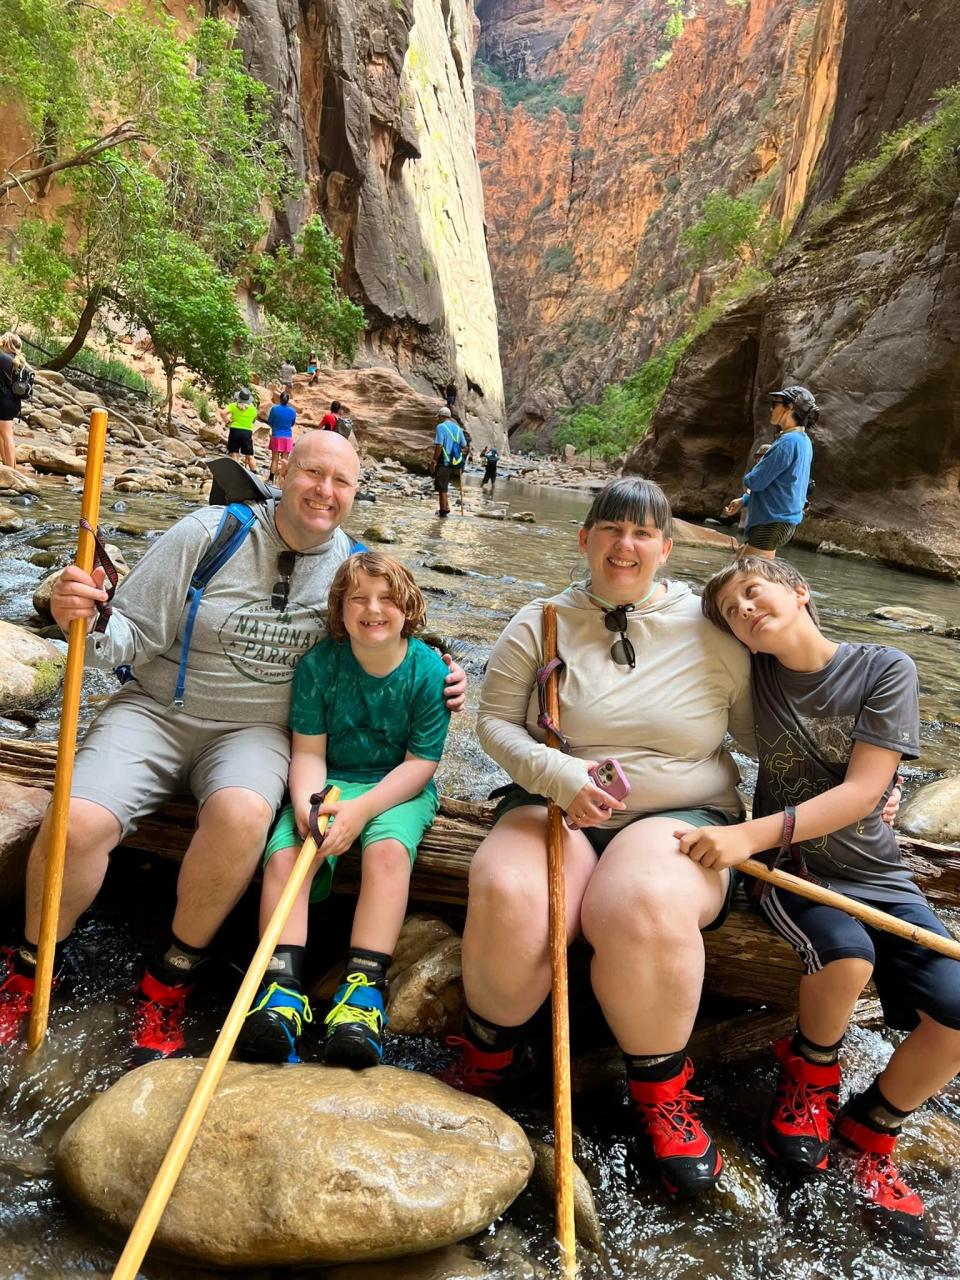 Scott and Jenn McCarty of Monroe and sons, Brian, 10, and Harrison, 8, hiked The Narrows in Zion National Park in Utah this summer. The family used The America the Beautiful National Park Pass to travel.